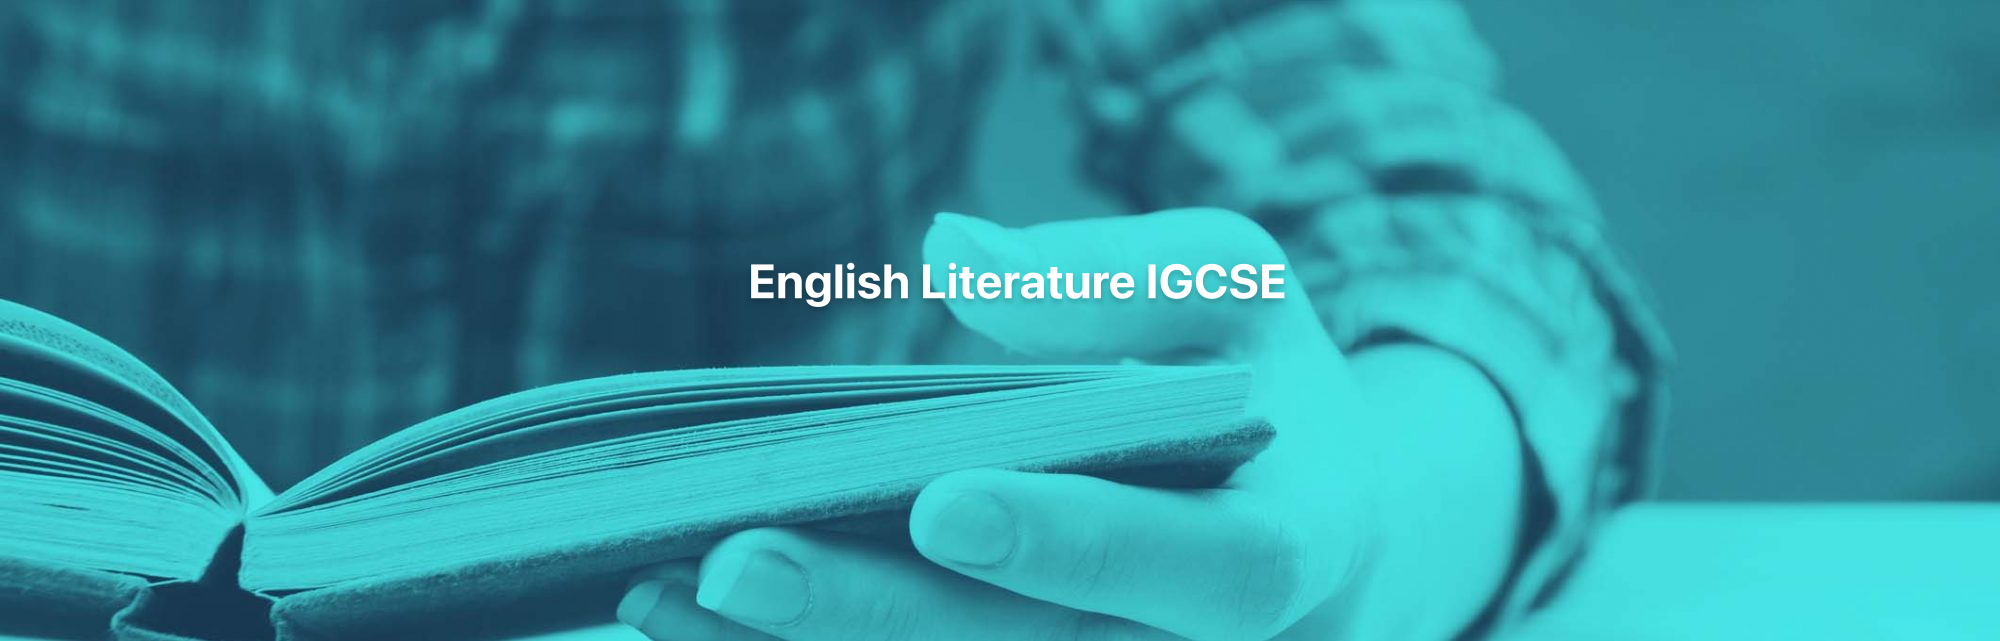 English Literature IGCSE Distance Learning Course by Oxbridge